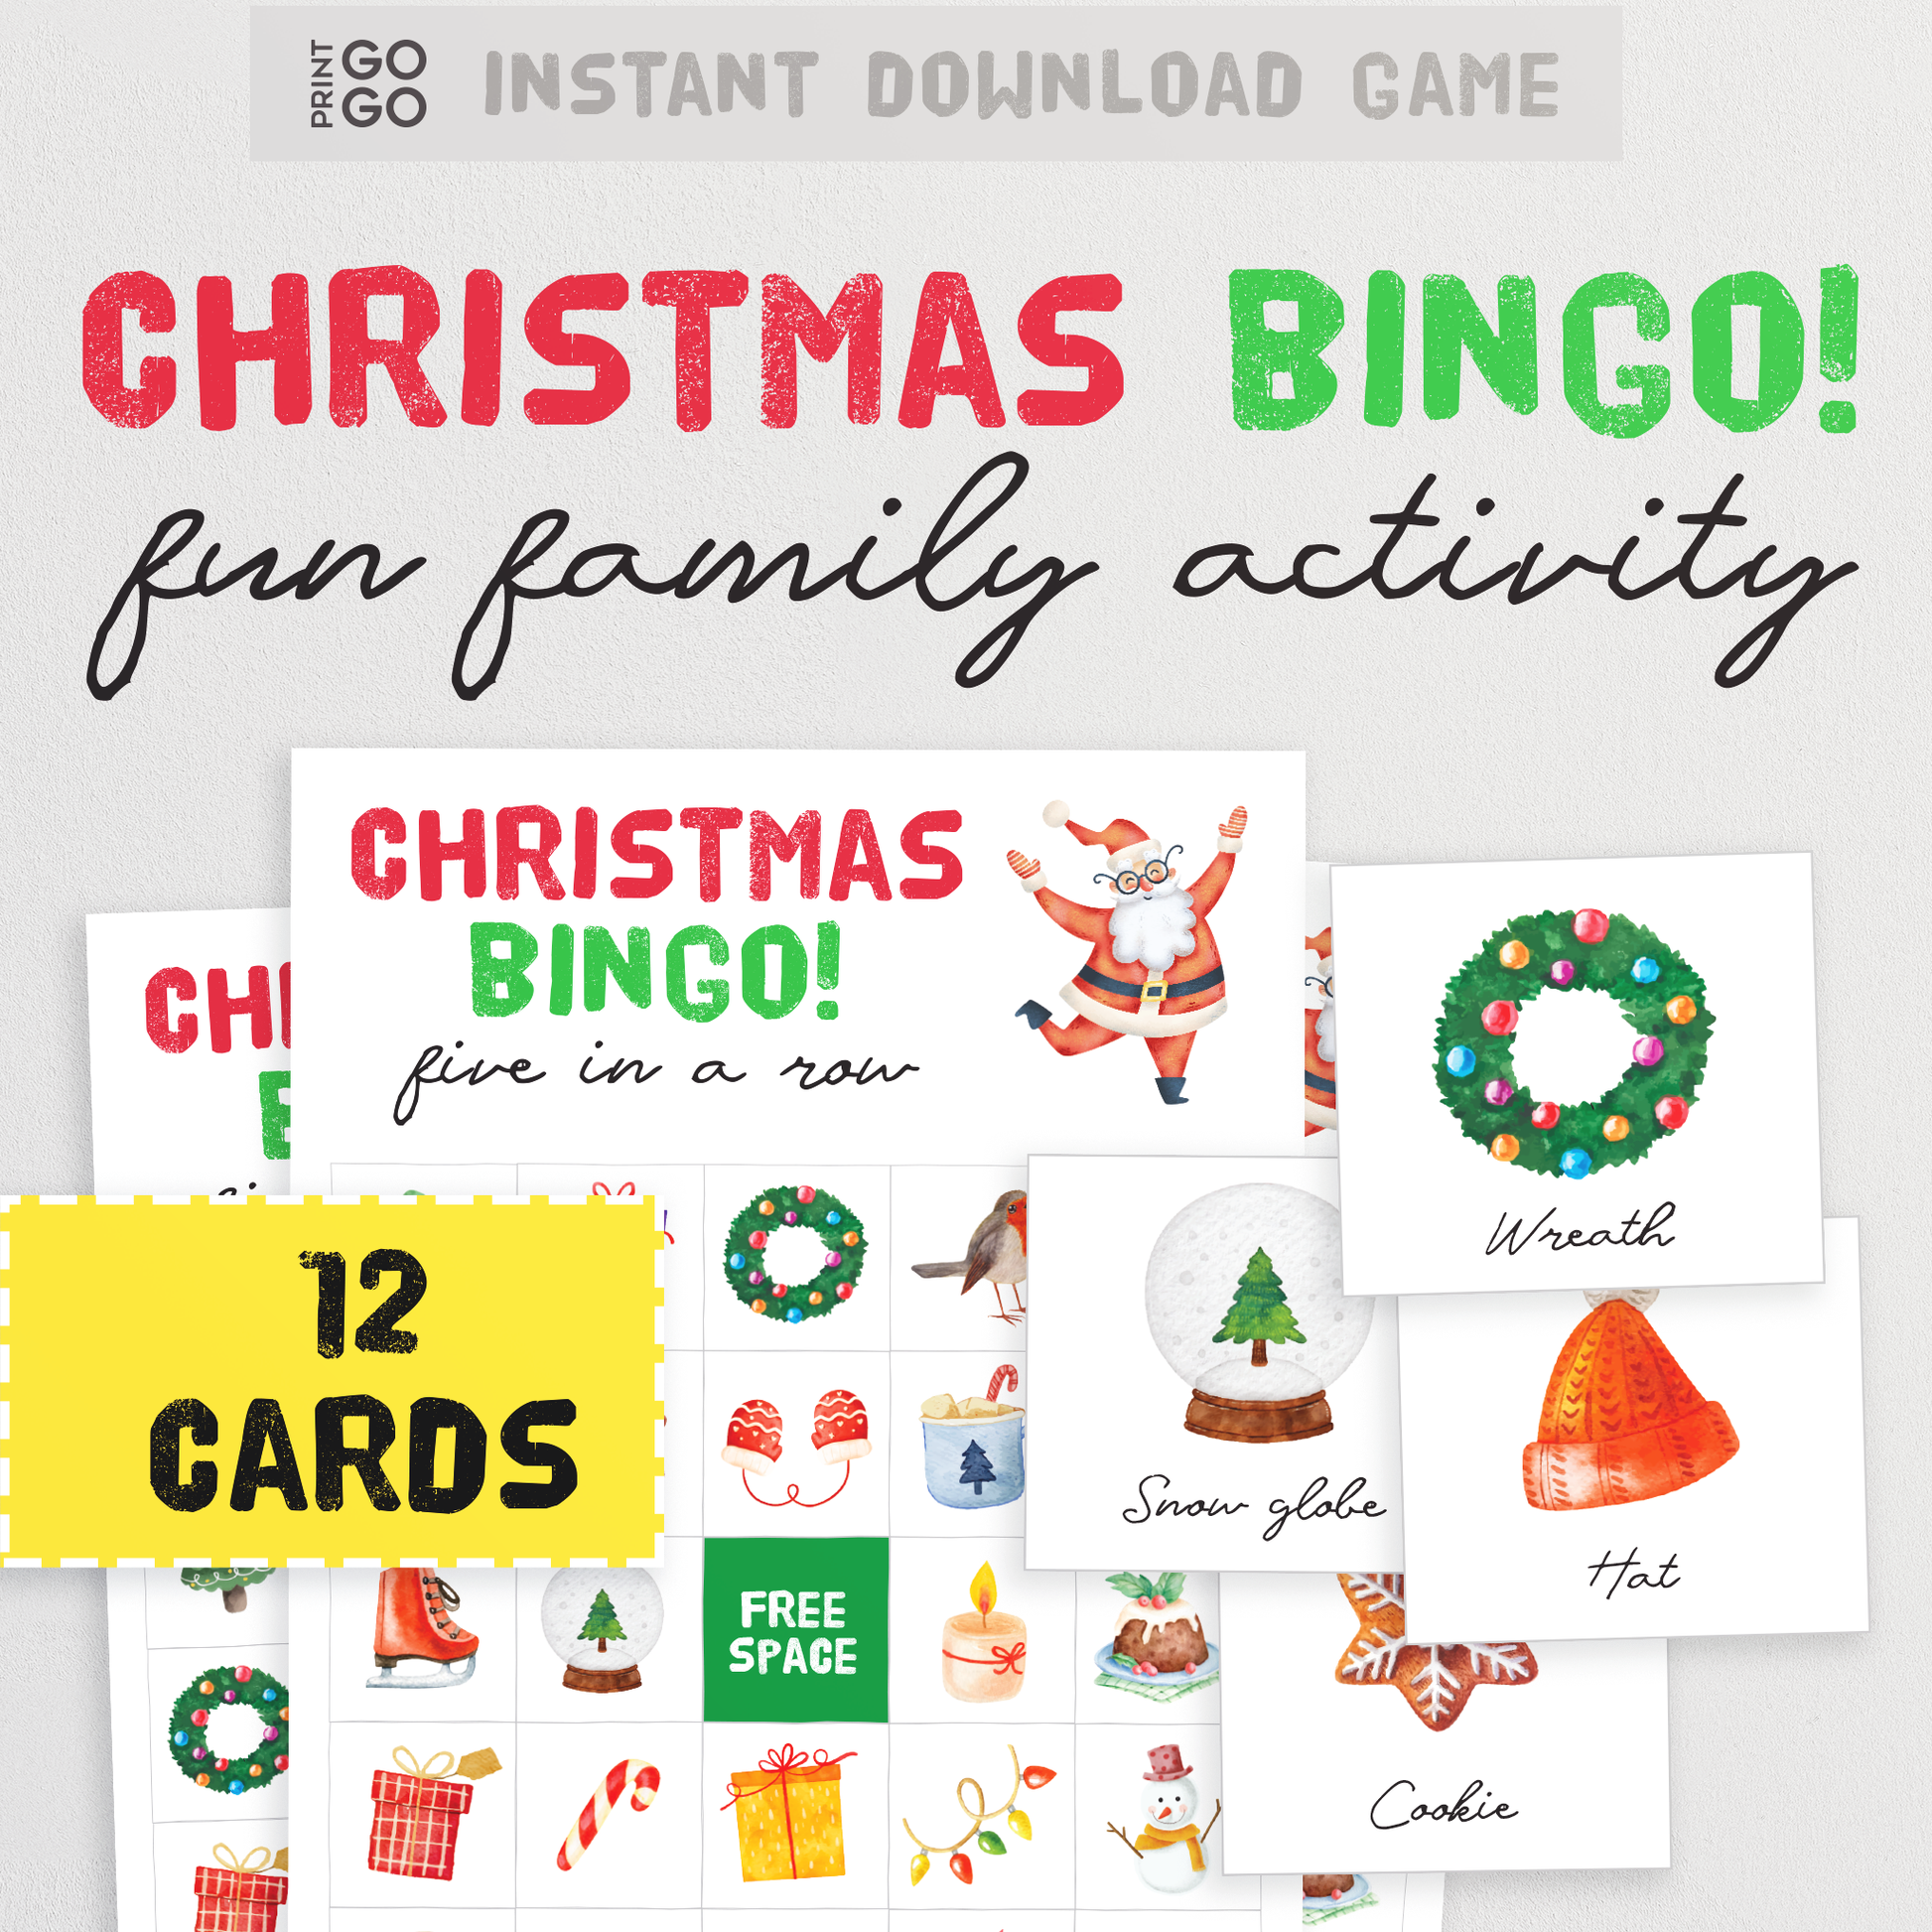 Christmas Bingo Cards - The Fun Holiday Party Game of Getting Five in a Row | Printable Family Activities | Group Xmas Party Game for Kids